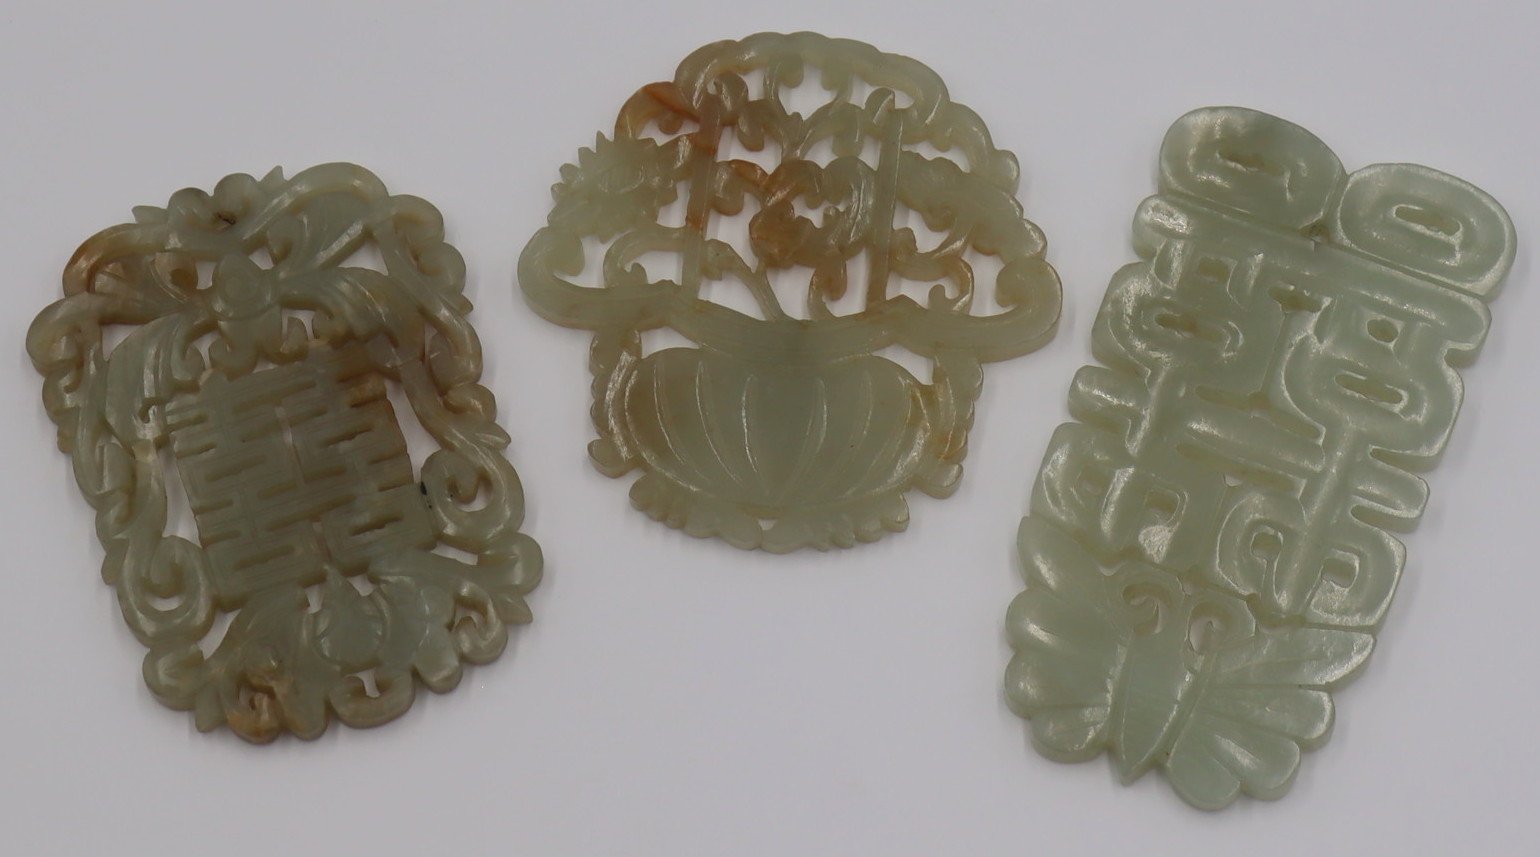  3 ANTIQUE CHINESE CARVED JADE 3bac18